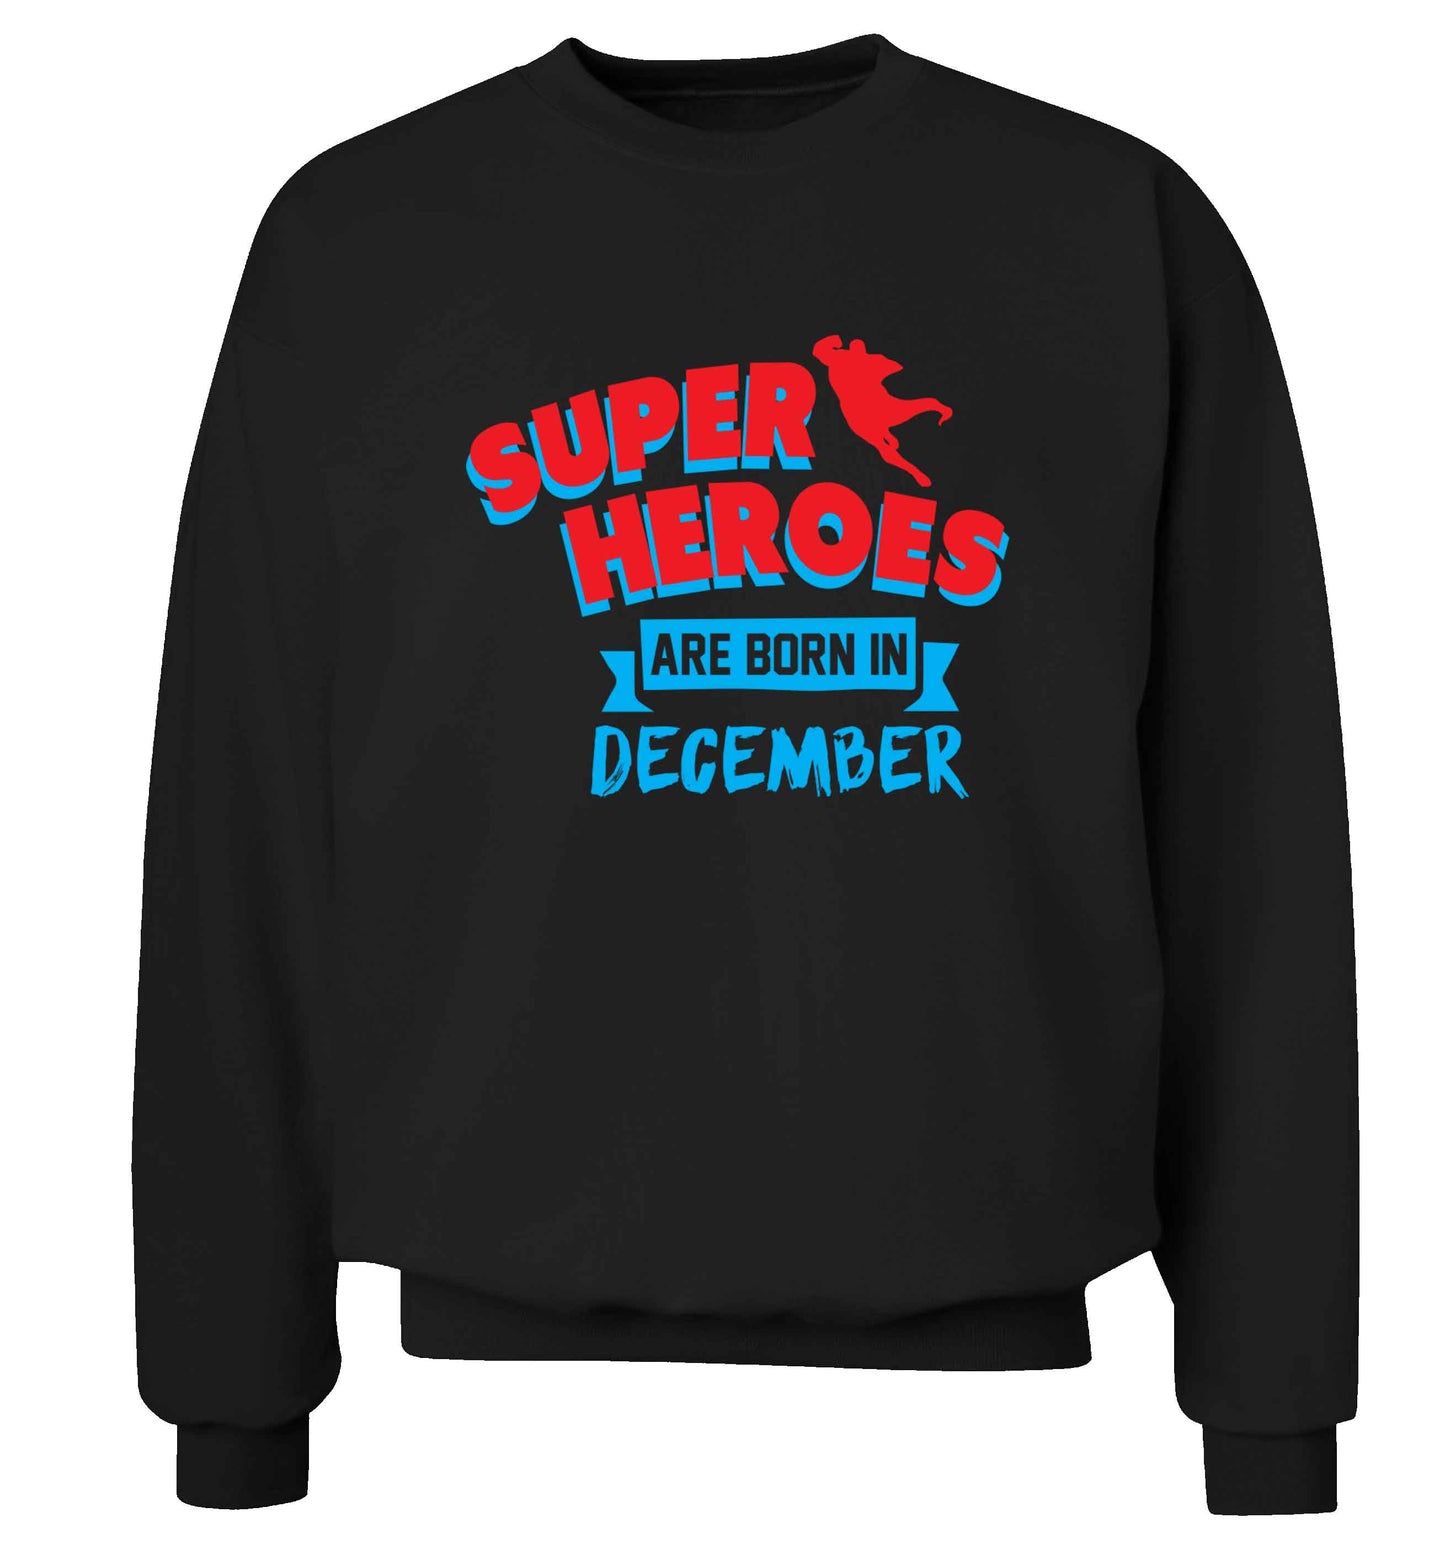 Superheroes are born in December Adult's unisex black Sweater 2XL